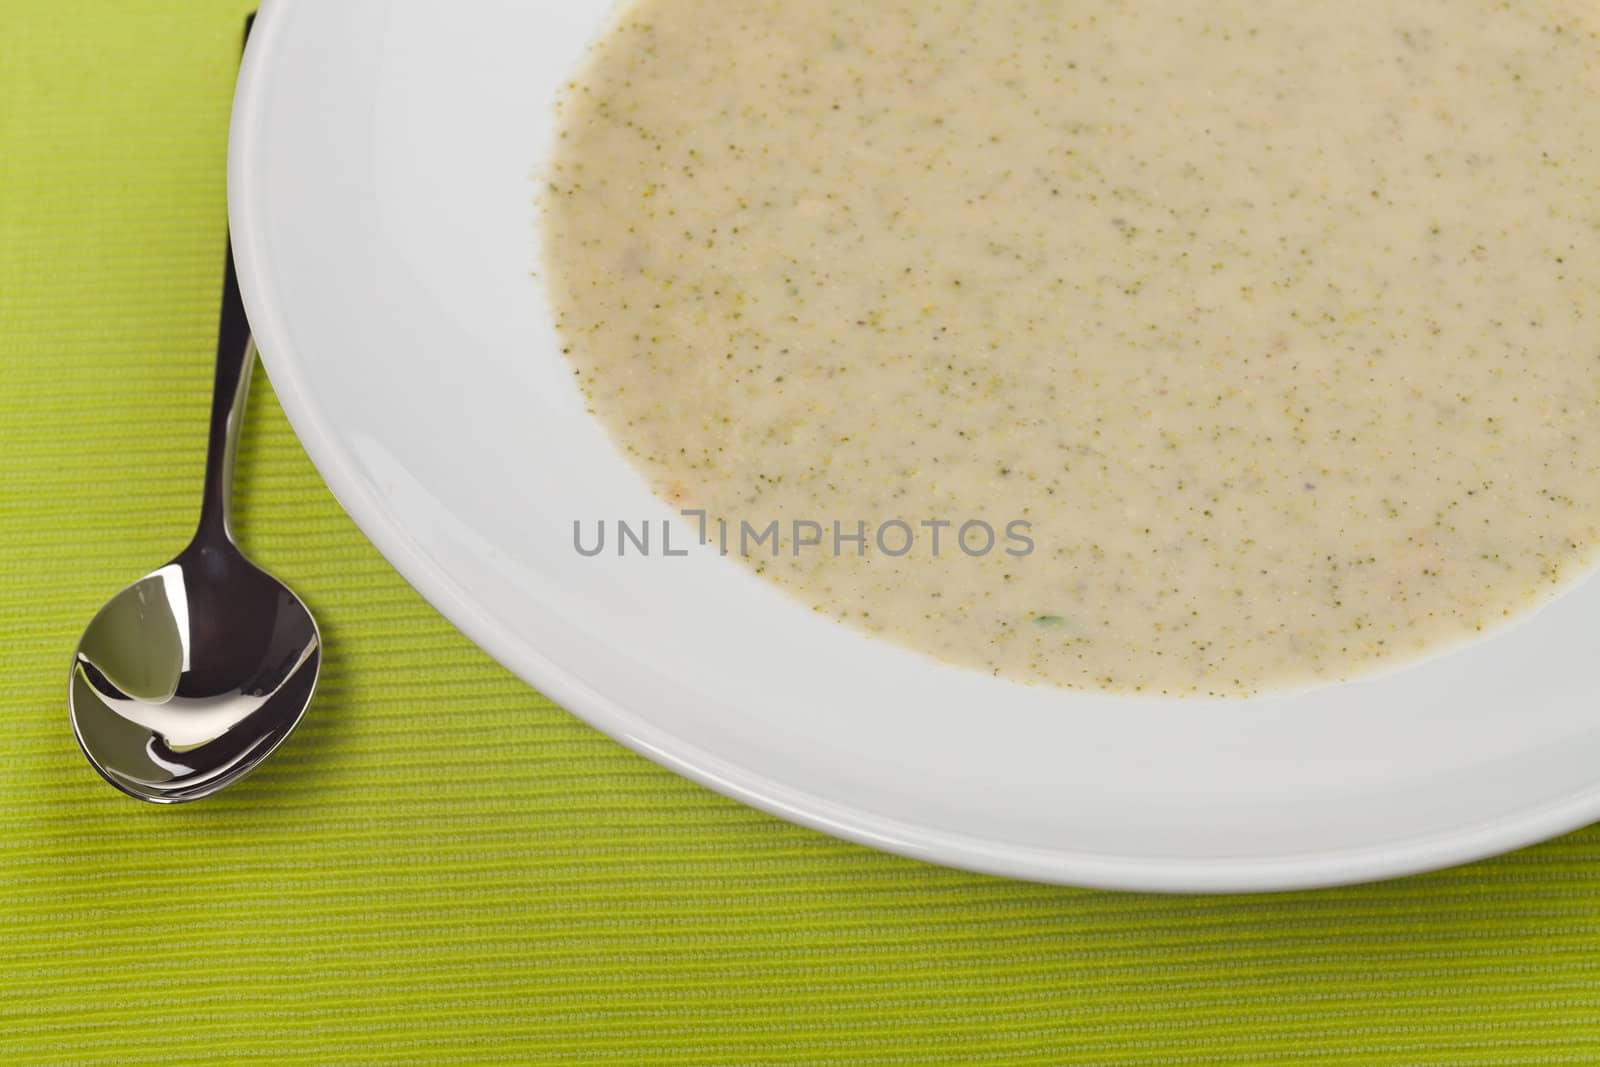 broccoli soup in a white plate by bernjuer